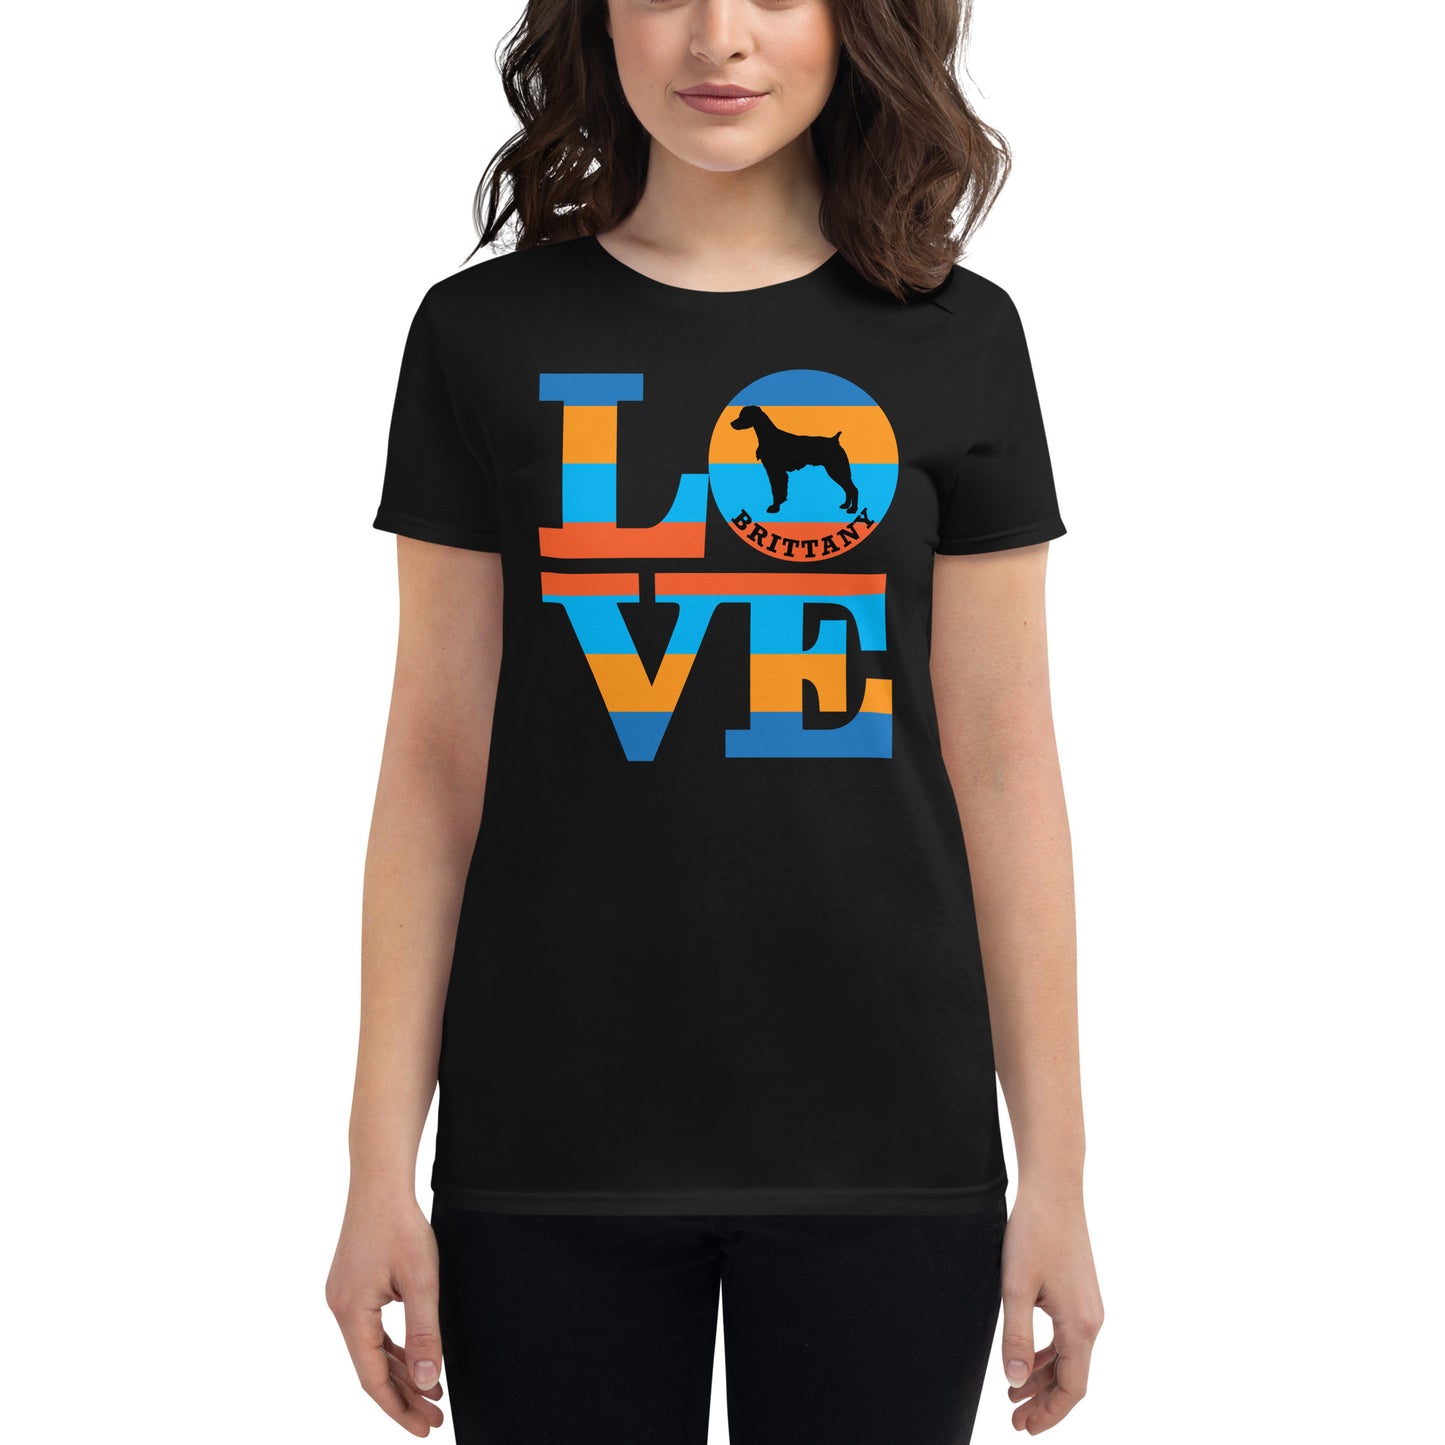 Brittany Love women’s black t-shirt by Dog Artistry.